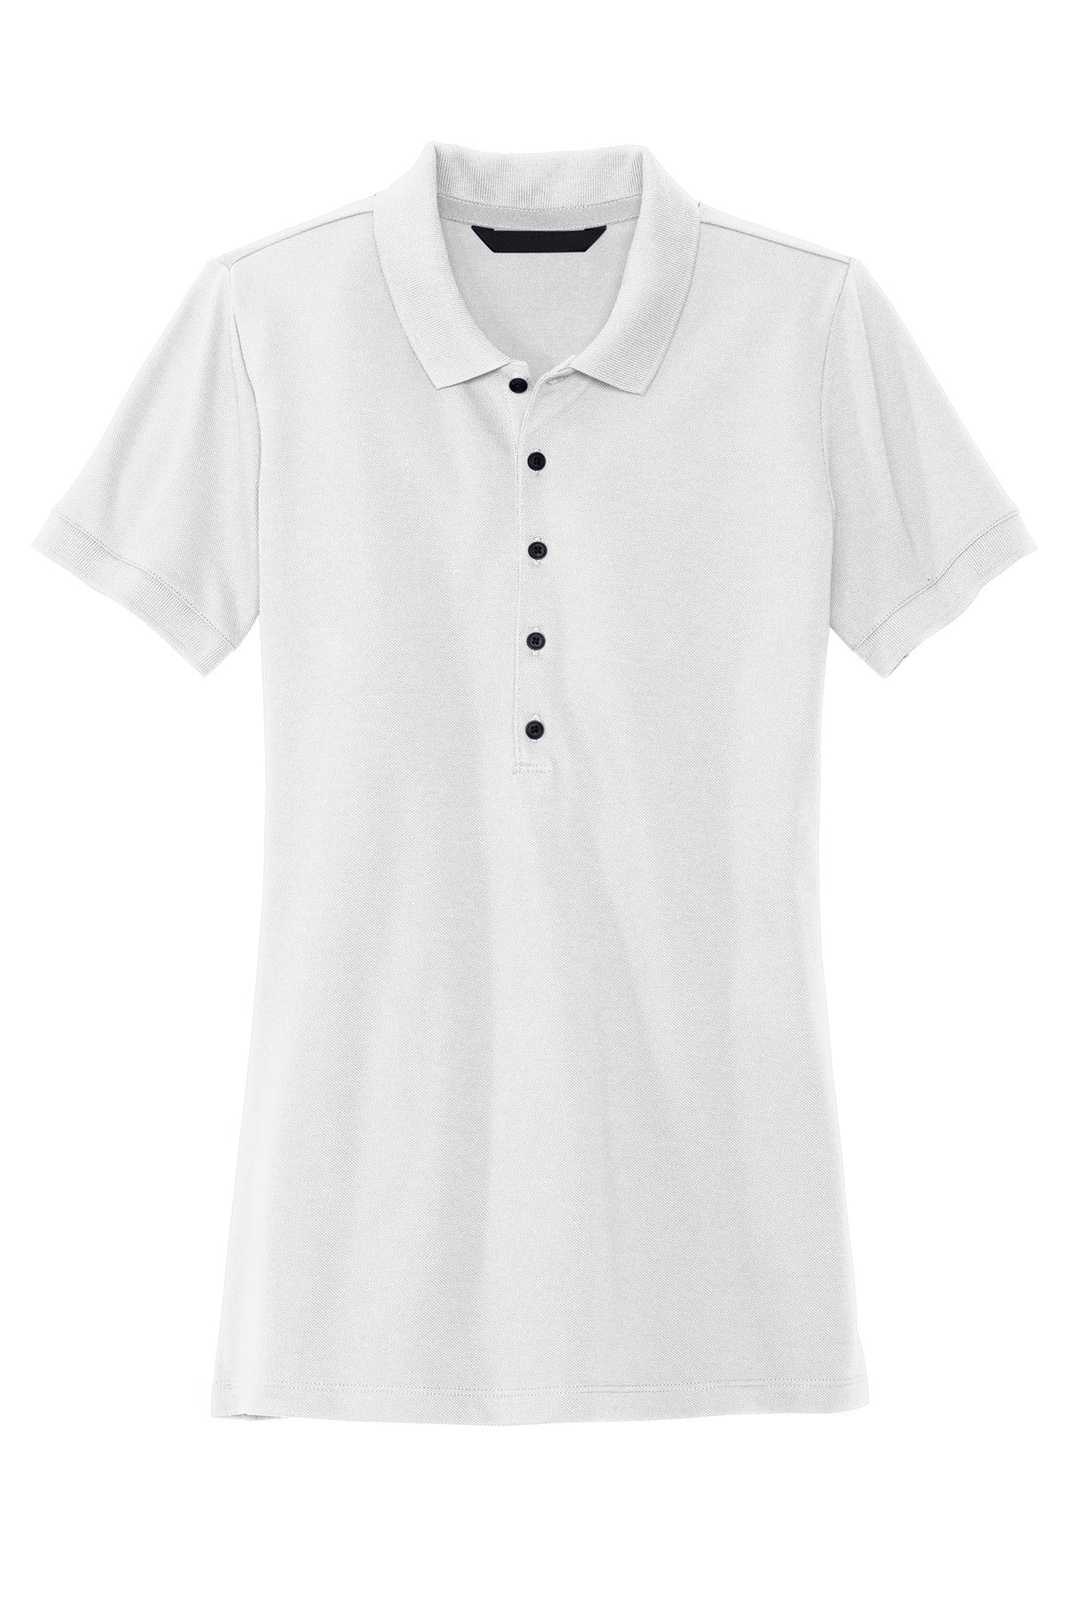 Mercer+Mettle MM1001 Women's Stretch Heavyweight Pique Polo - White - HIT a Double - 1